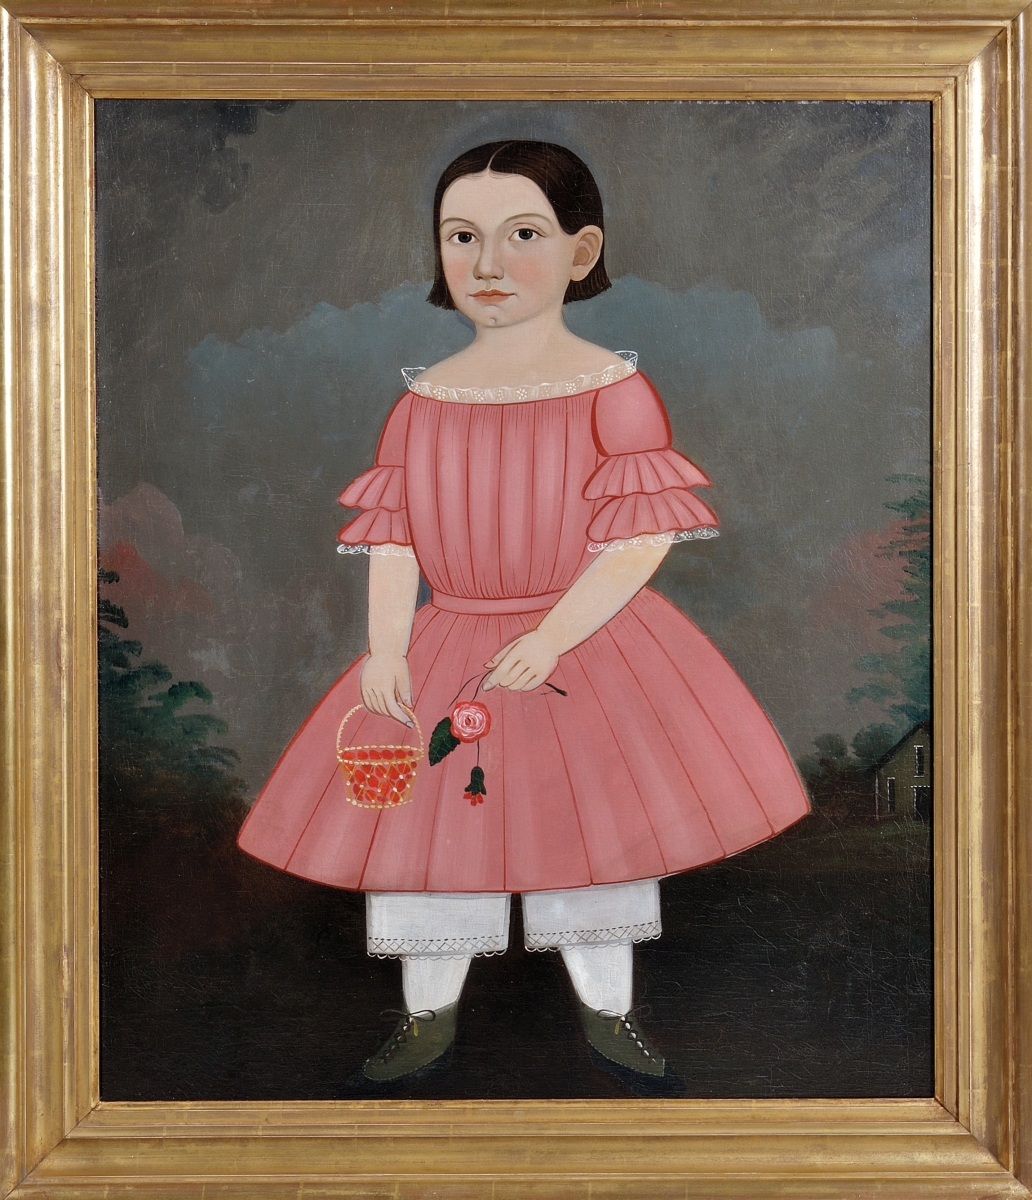 George Hartwell’s portrait of Mary A. Crockett of Lincoln, Maine, brought $30,750, the most successful folk painting of the sale.